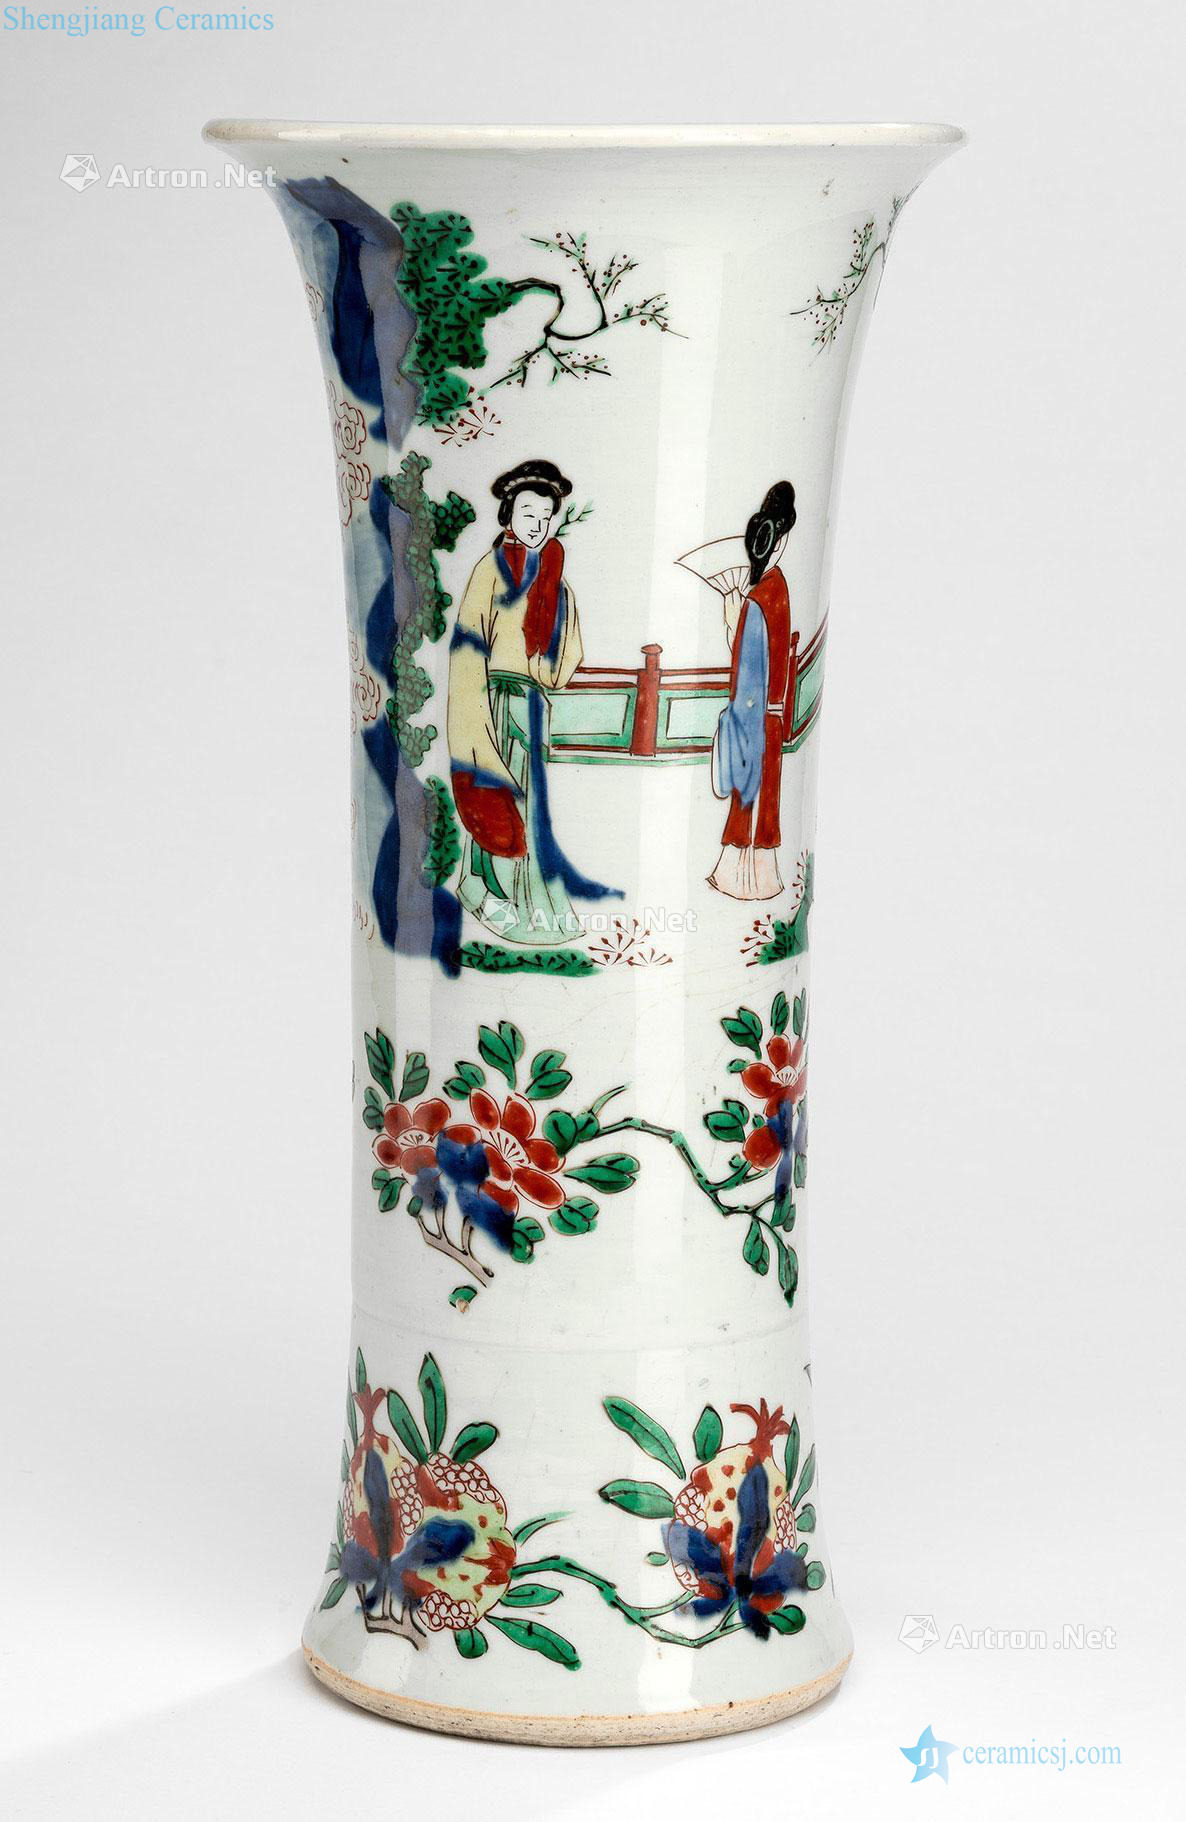 China's transition period/mid 17th century Colorful figure flower vase with romance story